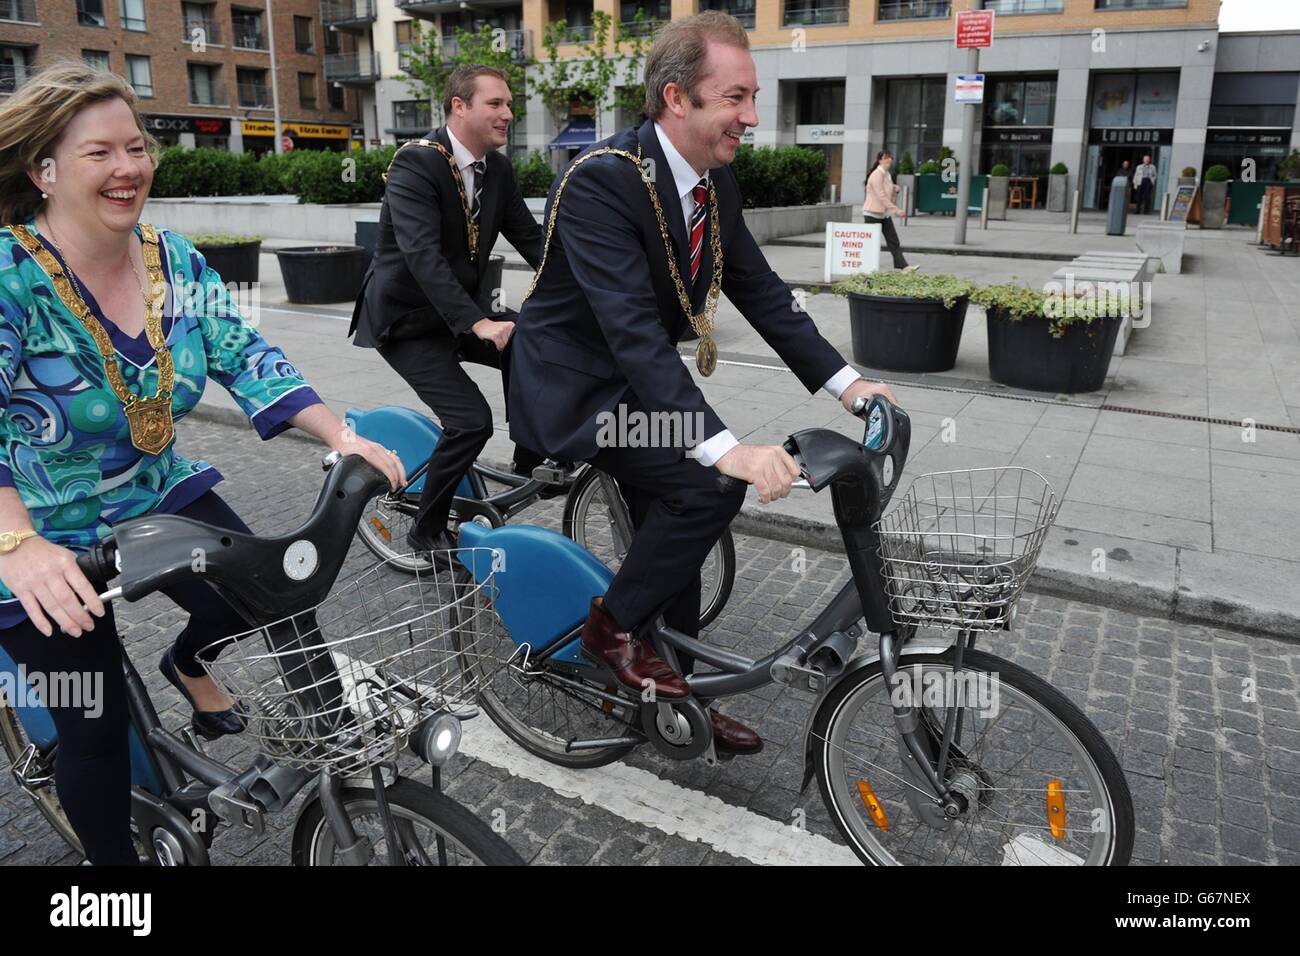 (From left to right) Carrie Smyth, Oisin Quinn The Lord Mayor of Dublin and Dermot Looney, as the three Labour representatives today launched a six-point action plan for Dublin, which includes the proposed introduction of a directly-elected mayor, an expansion of the Dublin Bikes scheme and plans to boost local tourism. Stock Photo